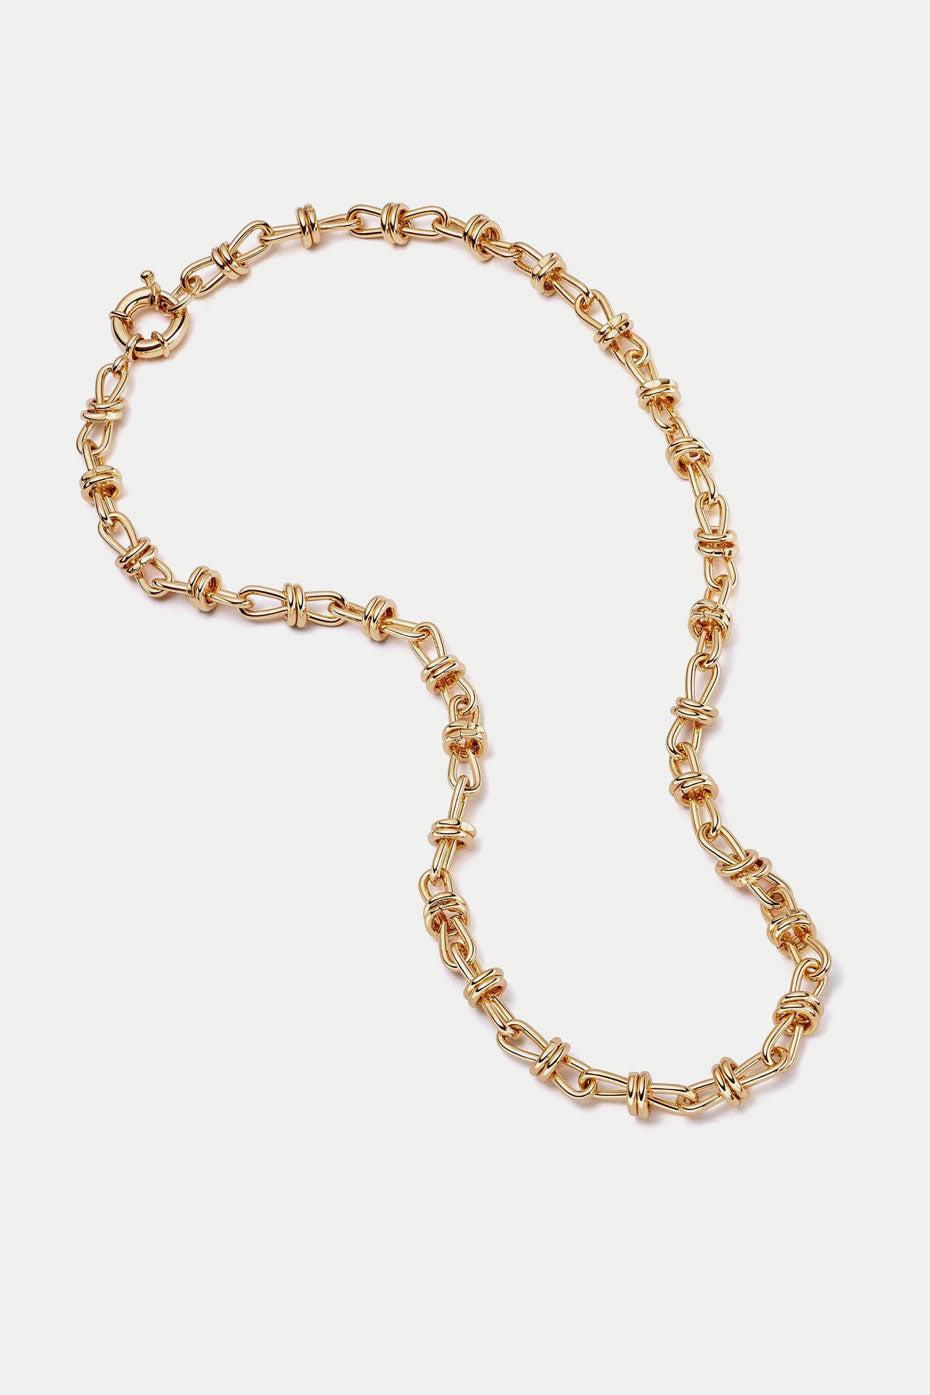 daisy-london-gold-plated-polly-sayer-knot-chain-necklace